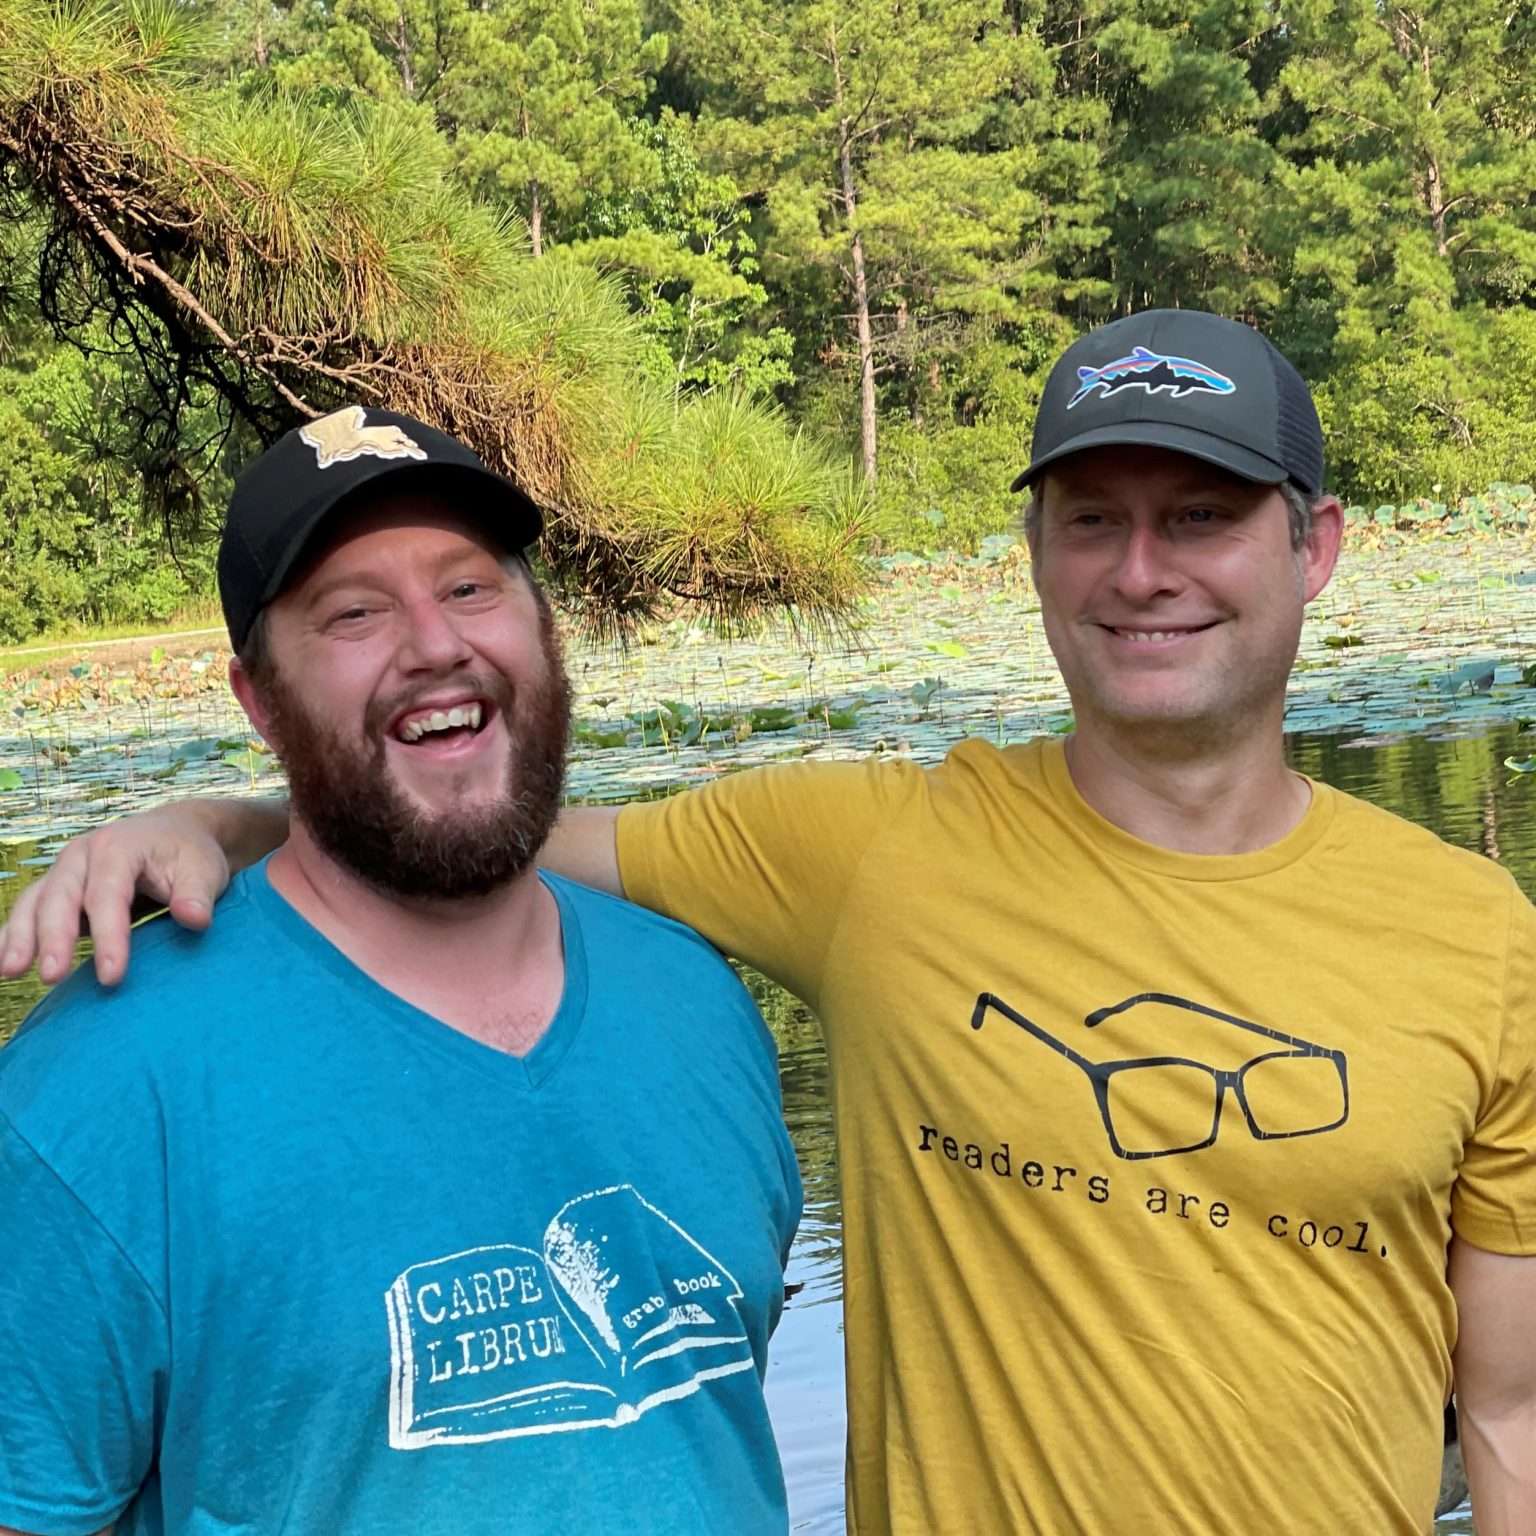 Elizabeth's husband, Robert, is wearing a custom blue tshirt with their business logo on the front. He is standing next to his friend wearing a yellow shirt with their business logo on the front. Elizabeth and Robert's friends will occasionally help them run their business.